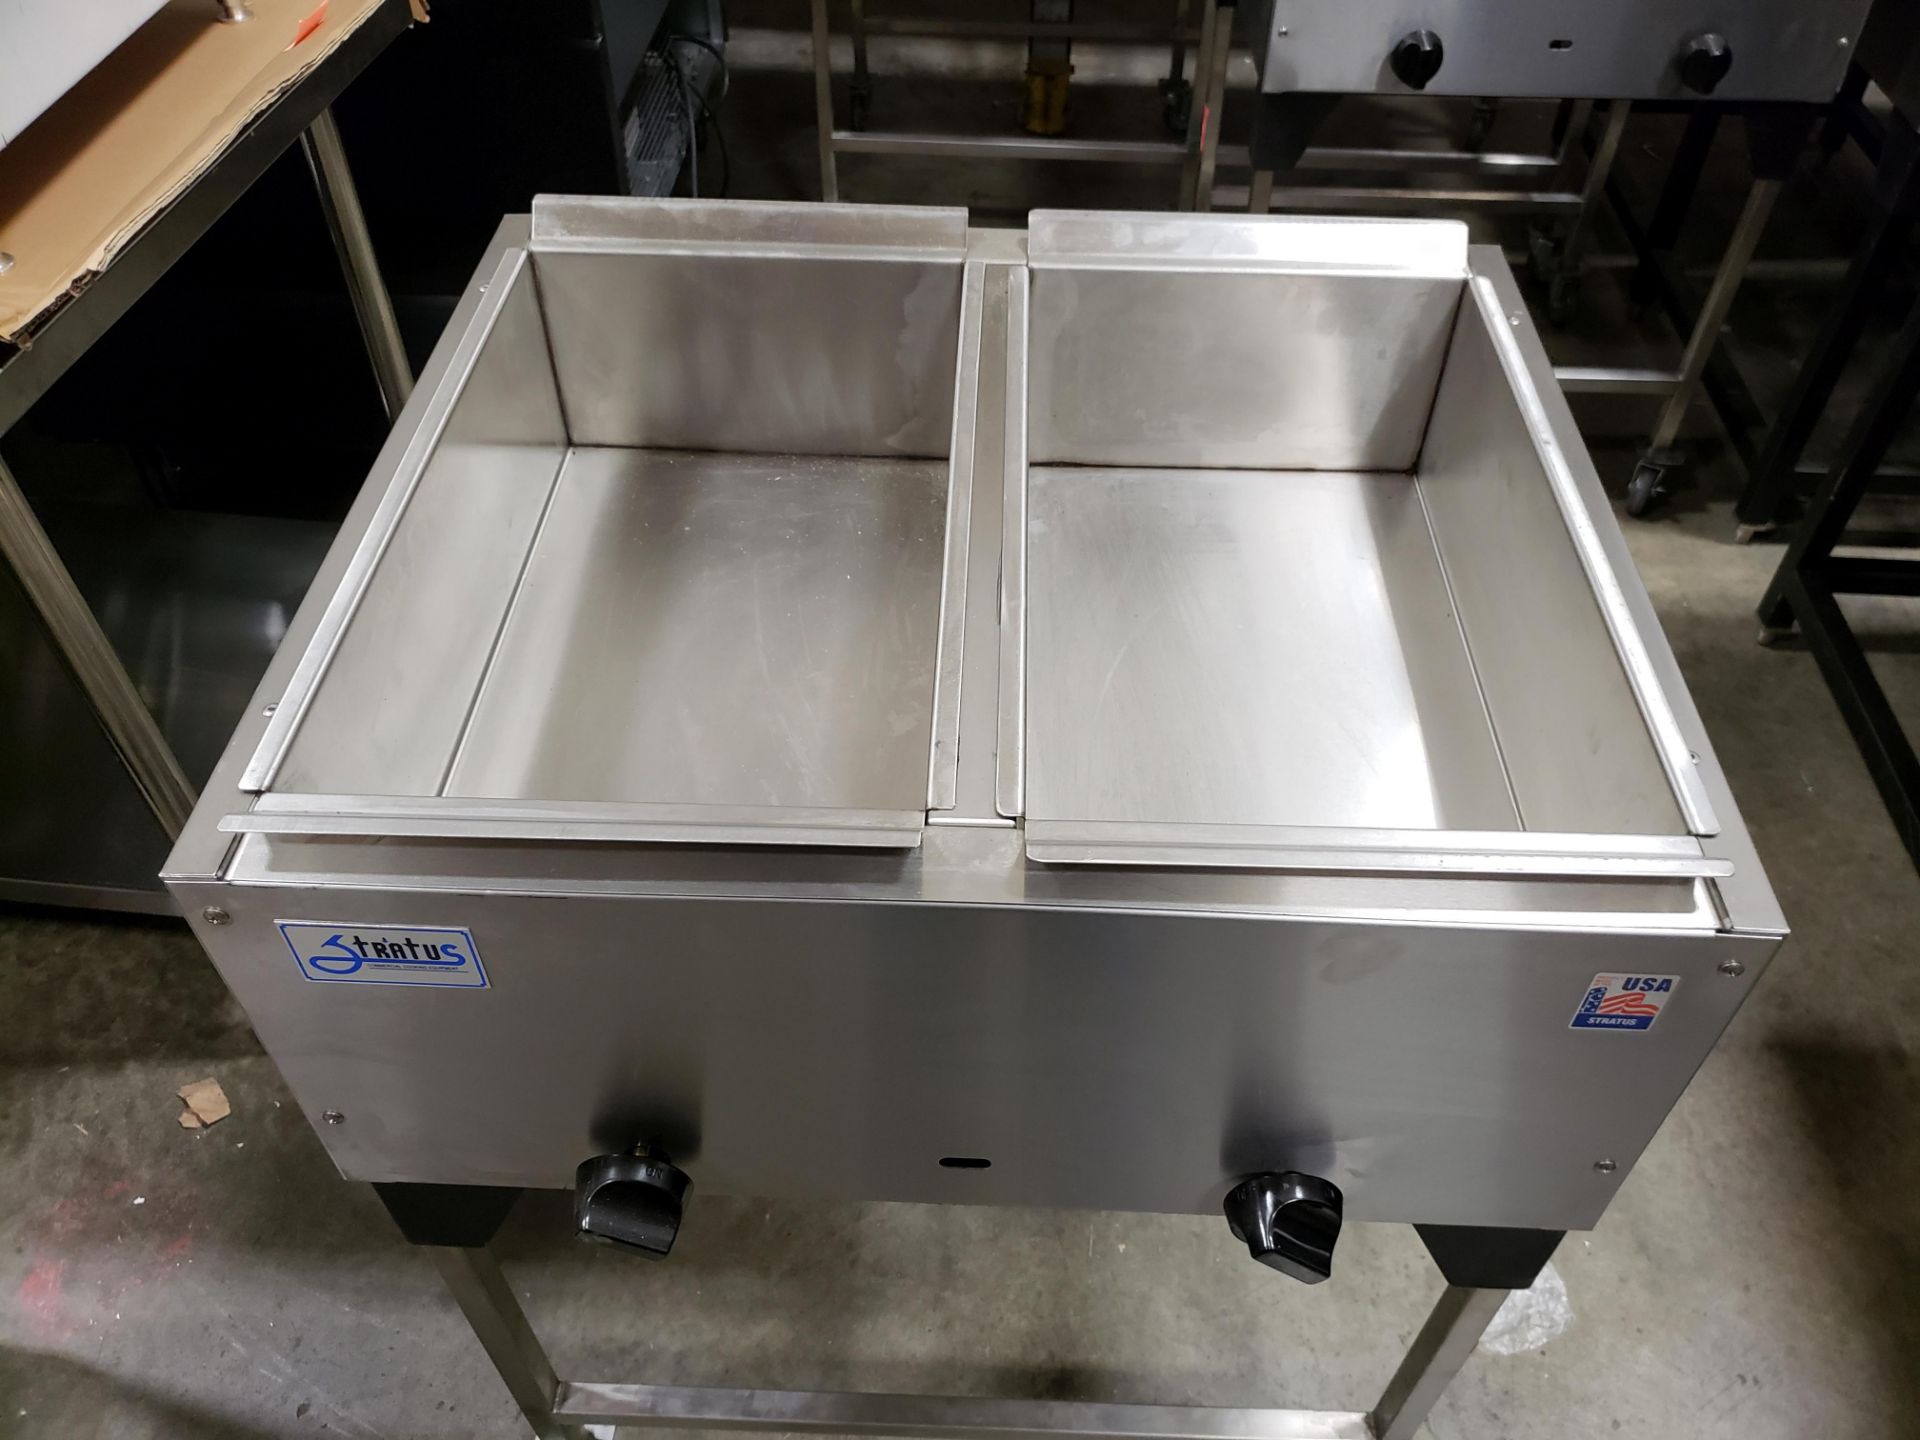 28" Propane 2 Well Steam Table on Casters - Model SST-28-2-S - CSA Certified - Made in USA - Bild 2 aus 3